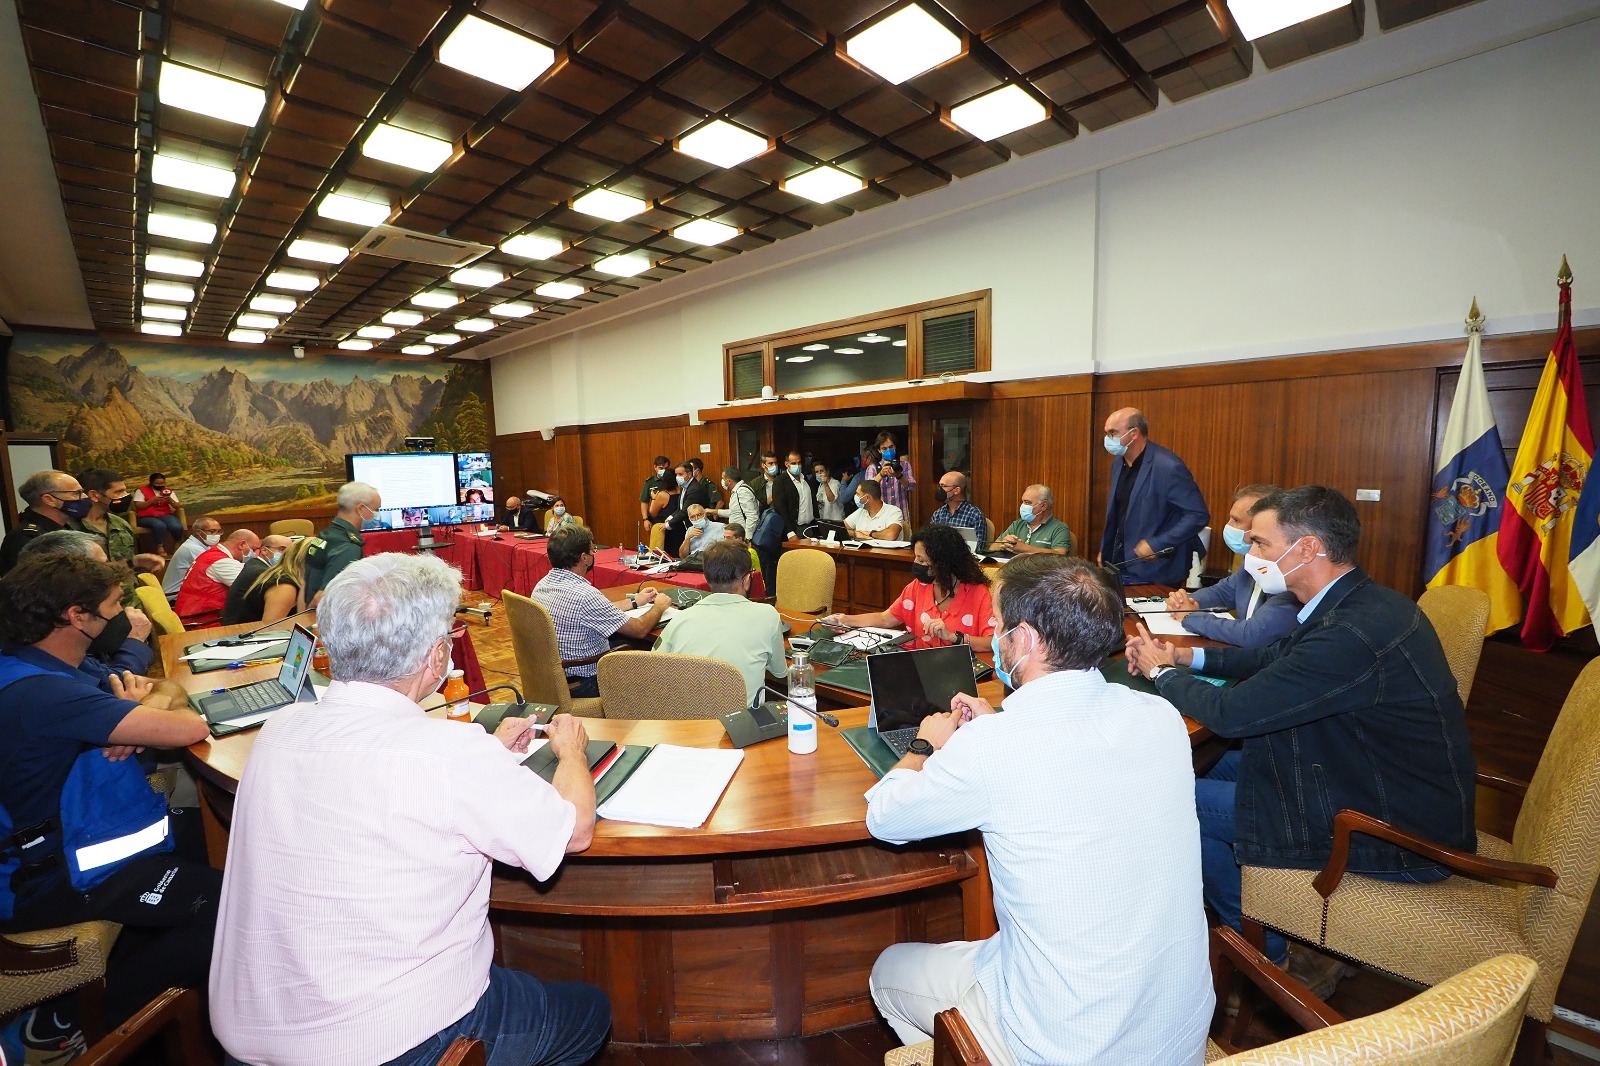 This photo shows the Steering committee meeting for the first time to organise evacuations. Sourced from Gobierno de Canarias (2021).